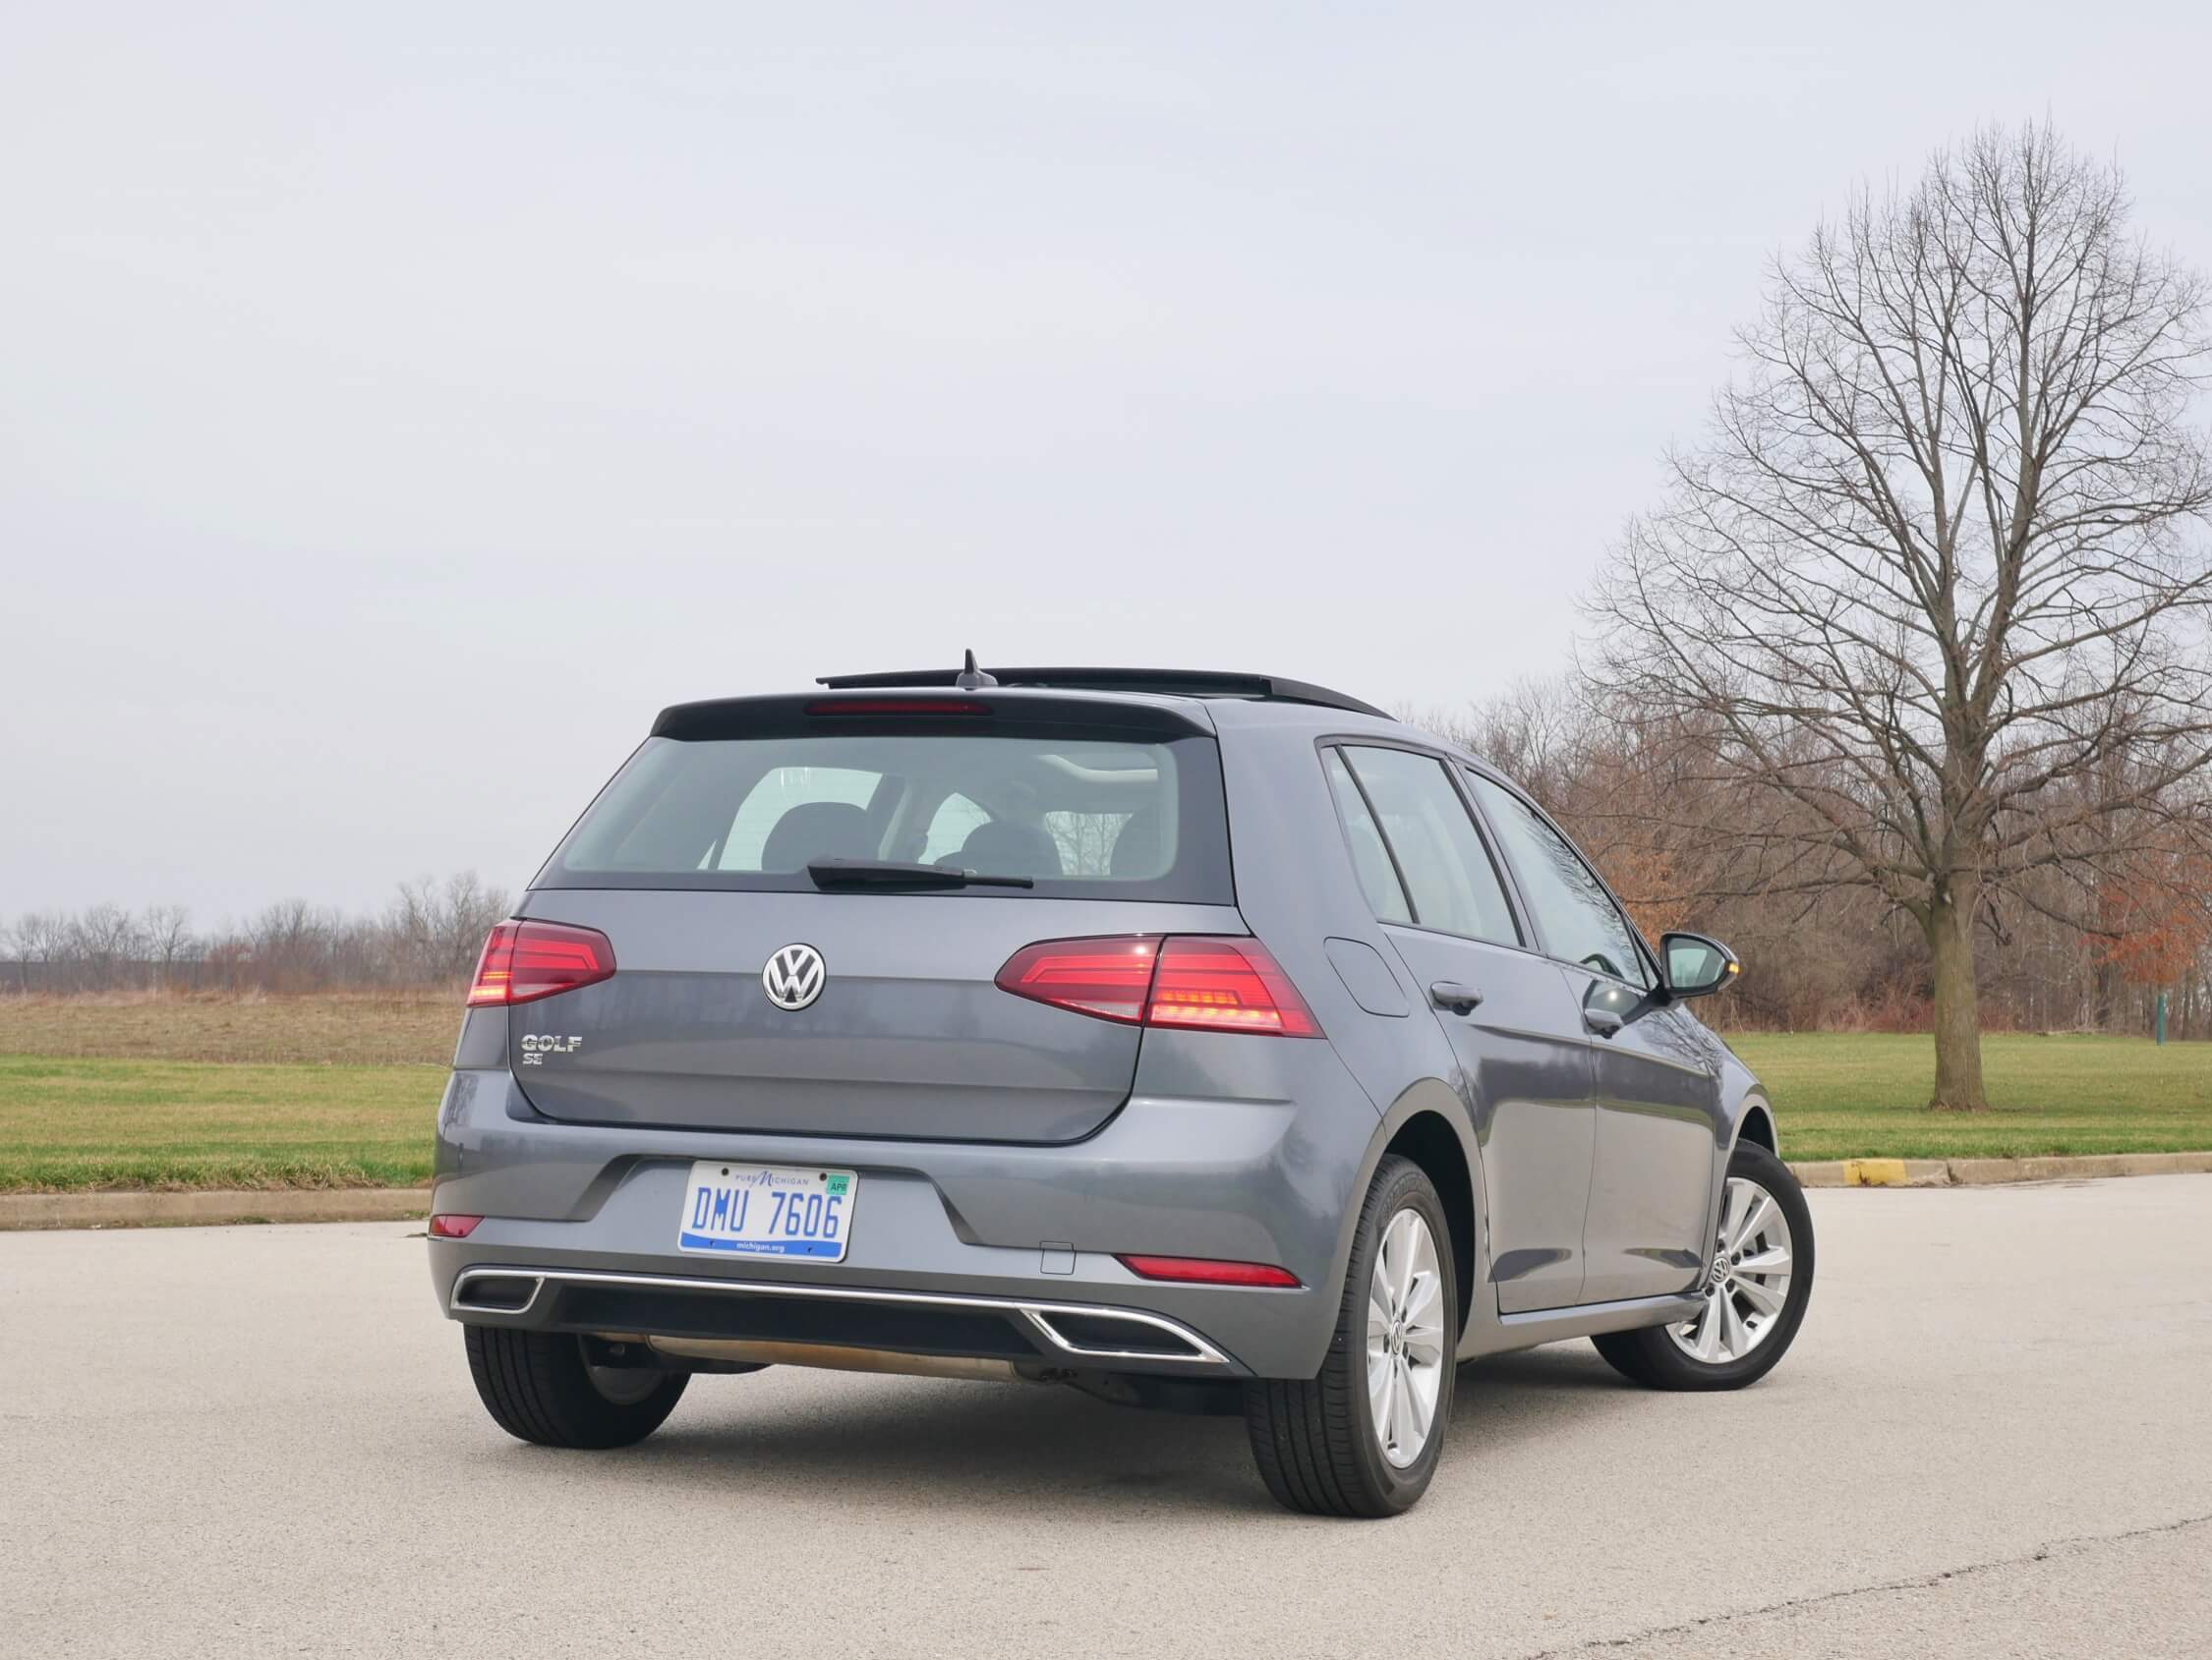 2019 Volkswagen Golf SE: Body matching roof spoiler = Sporty; Wrap around LED taillamps, dual exhaust outlets = trapezoid classy